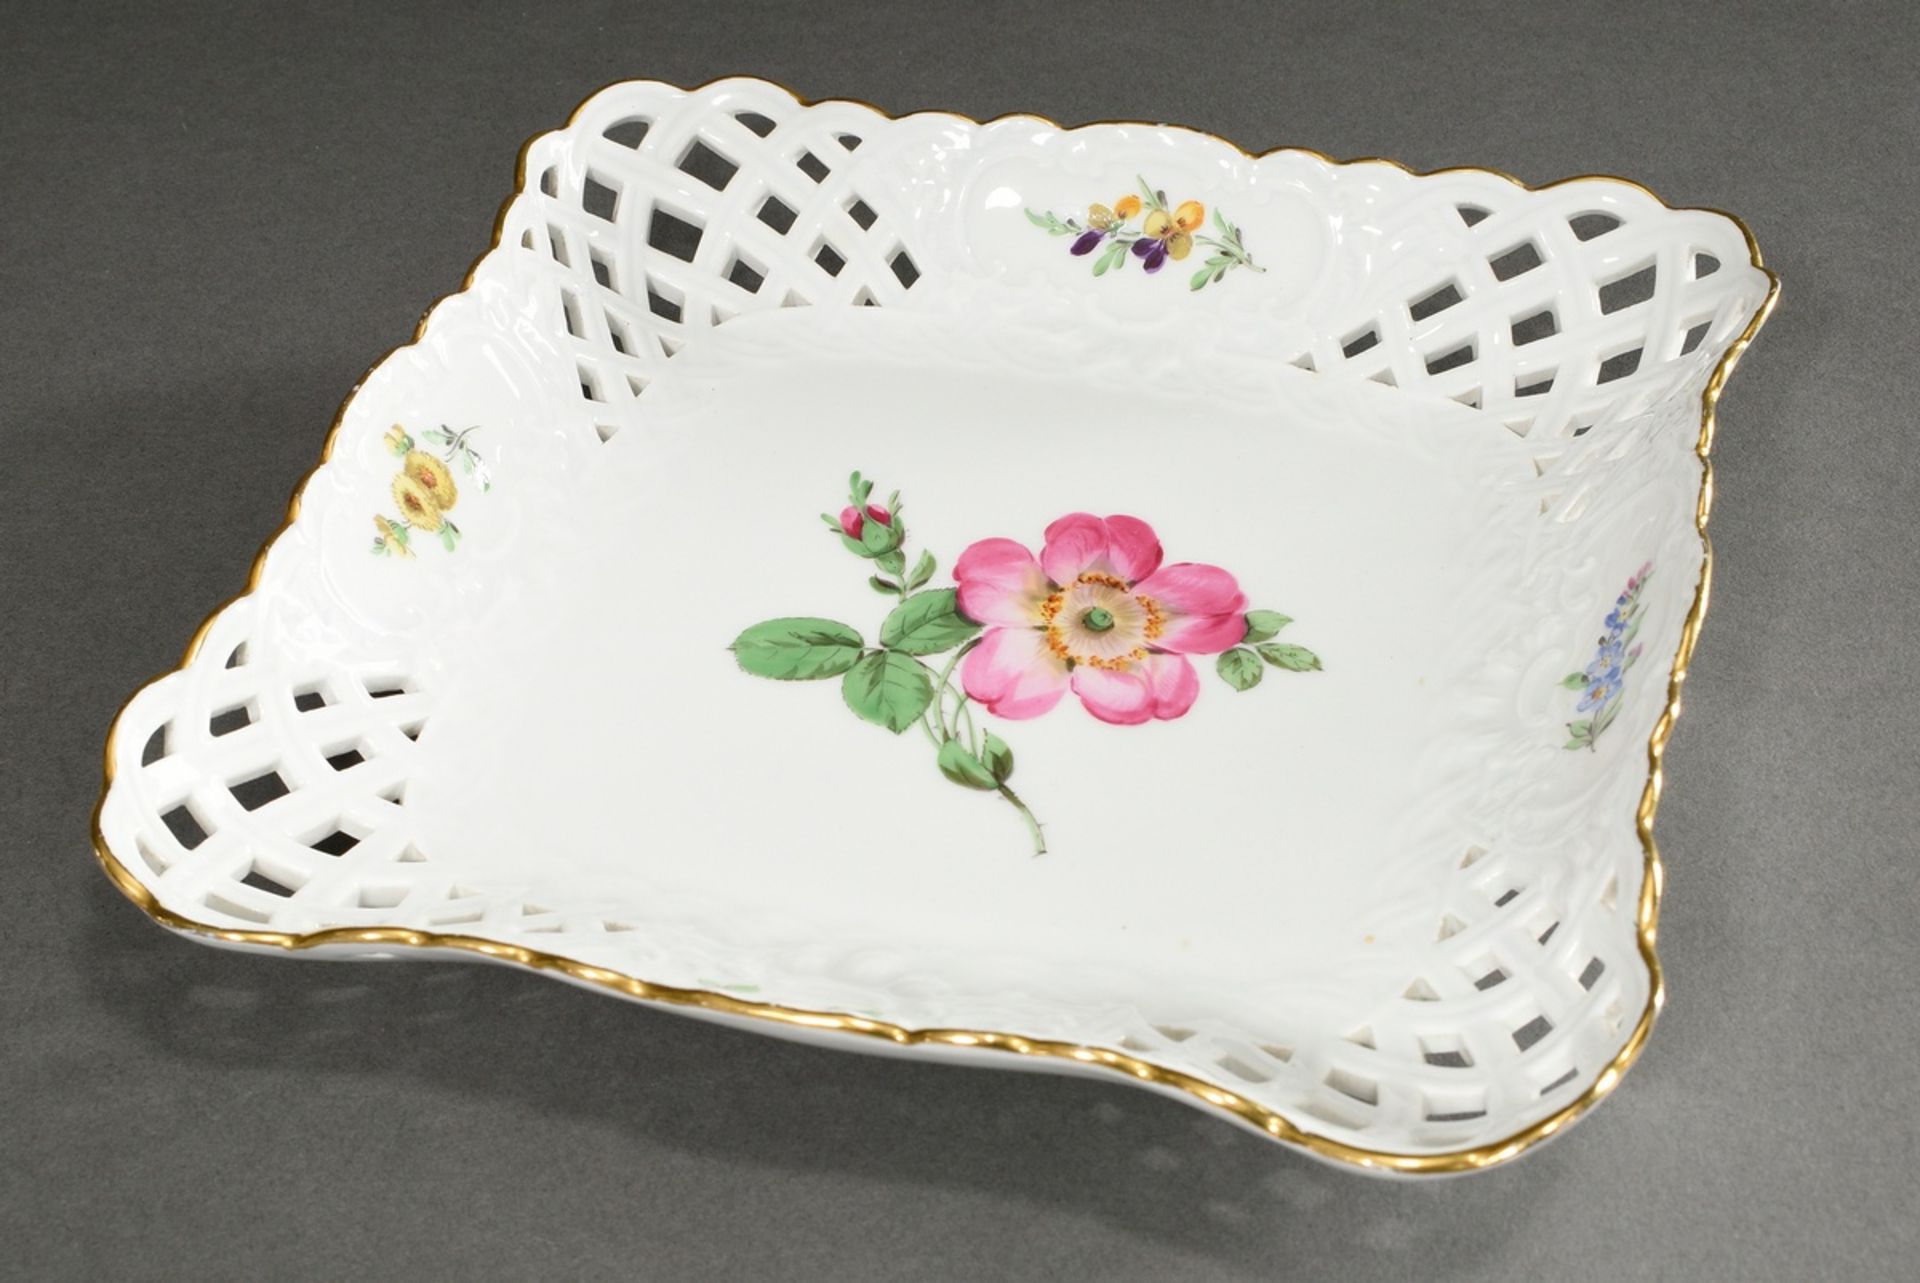 3 Various pieces Meissen with floral decorations, 20th c.: angular bowl with openwork wall (23x23cm - Image 7 of 8